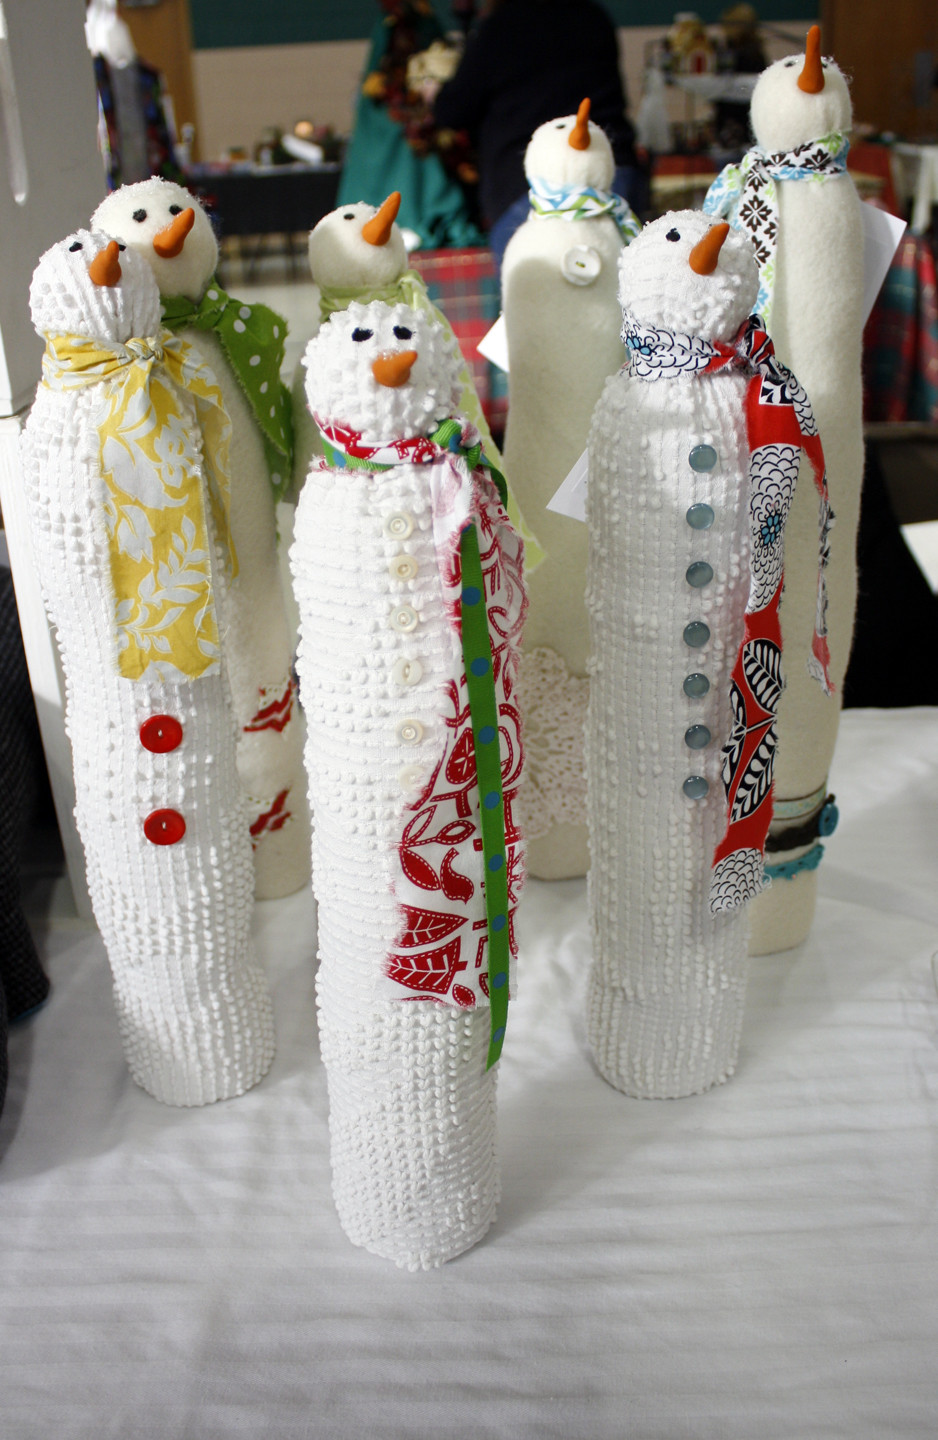 Christmas Crafts To Make And Sell Pinterest
 Craft Show Tuesday